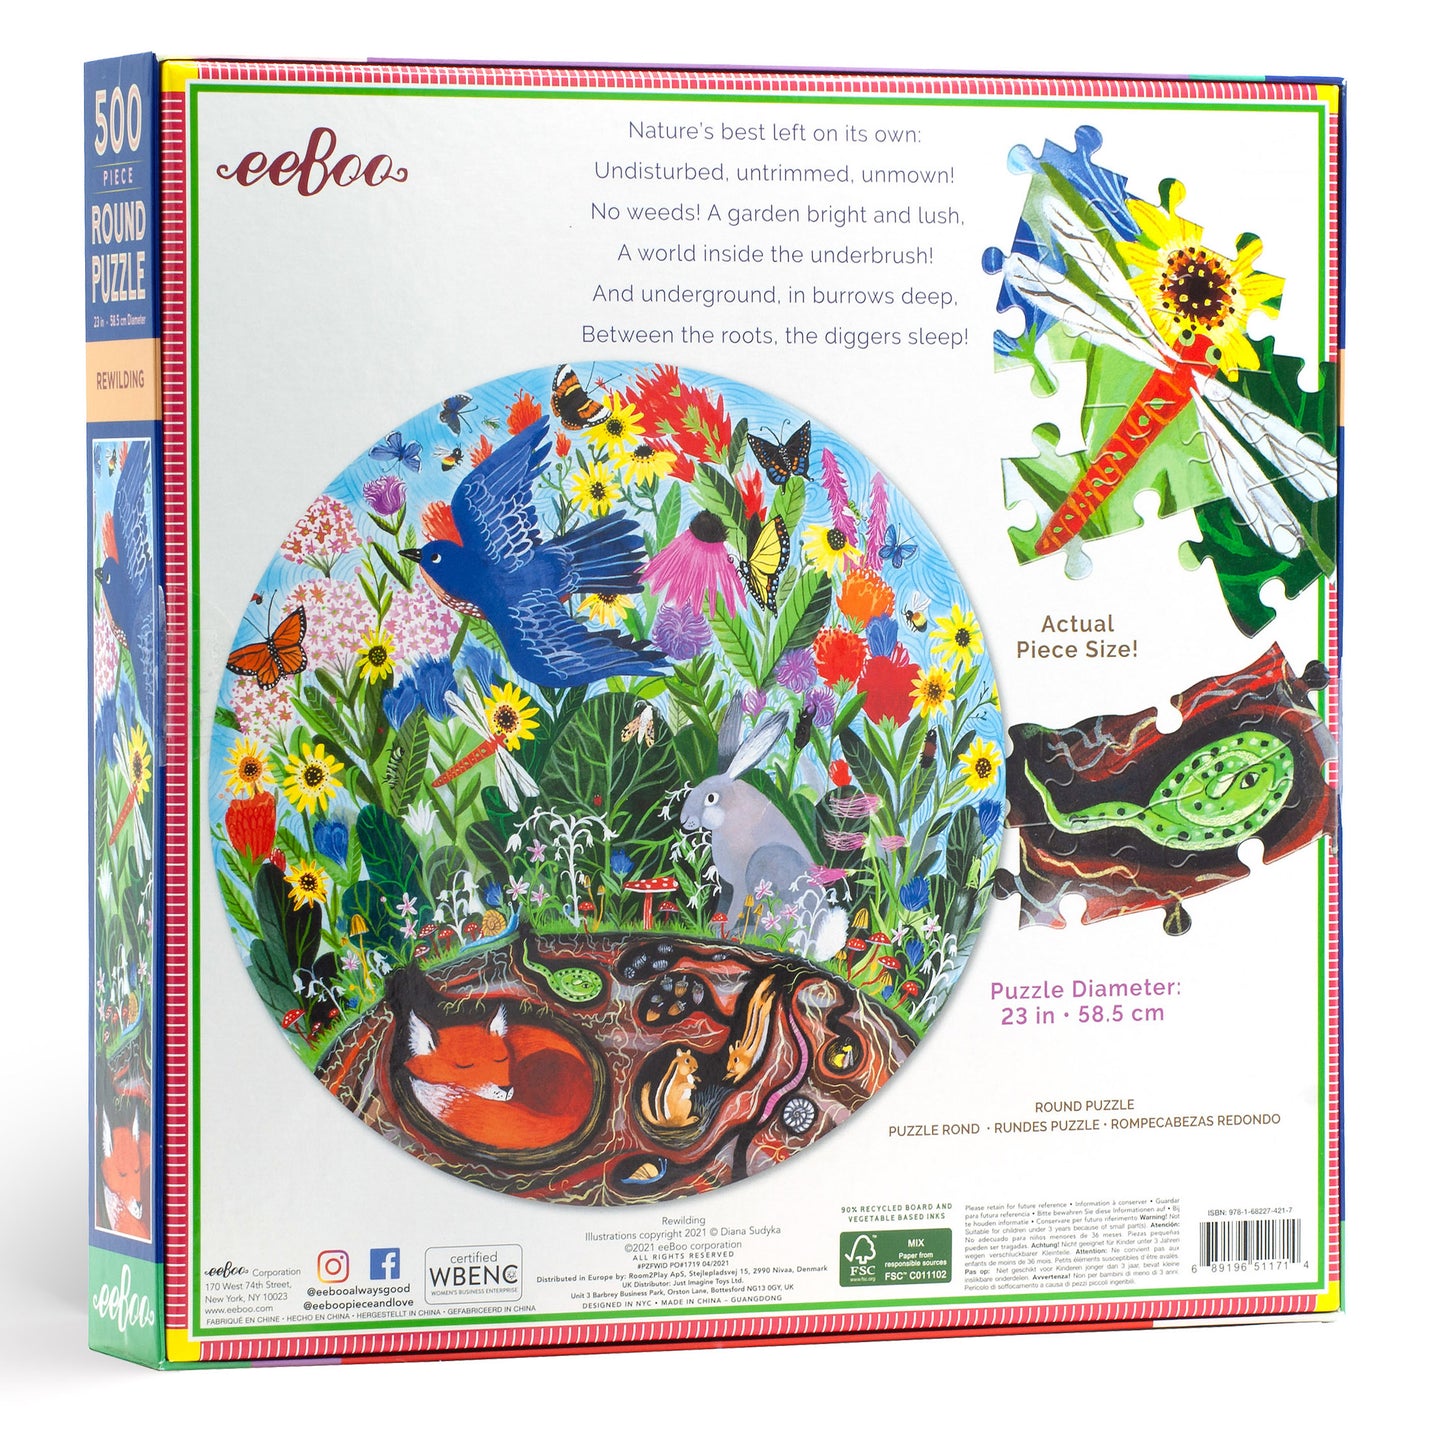 Rewilding Nature 500 Piece Round Jigsaw Puzzle | eeBoo Piece & Love | Great Gifts for Animal Lovers